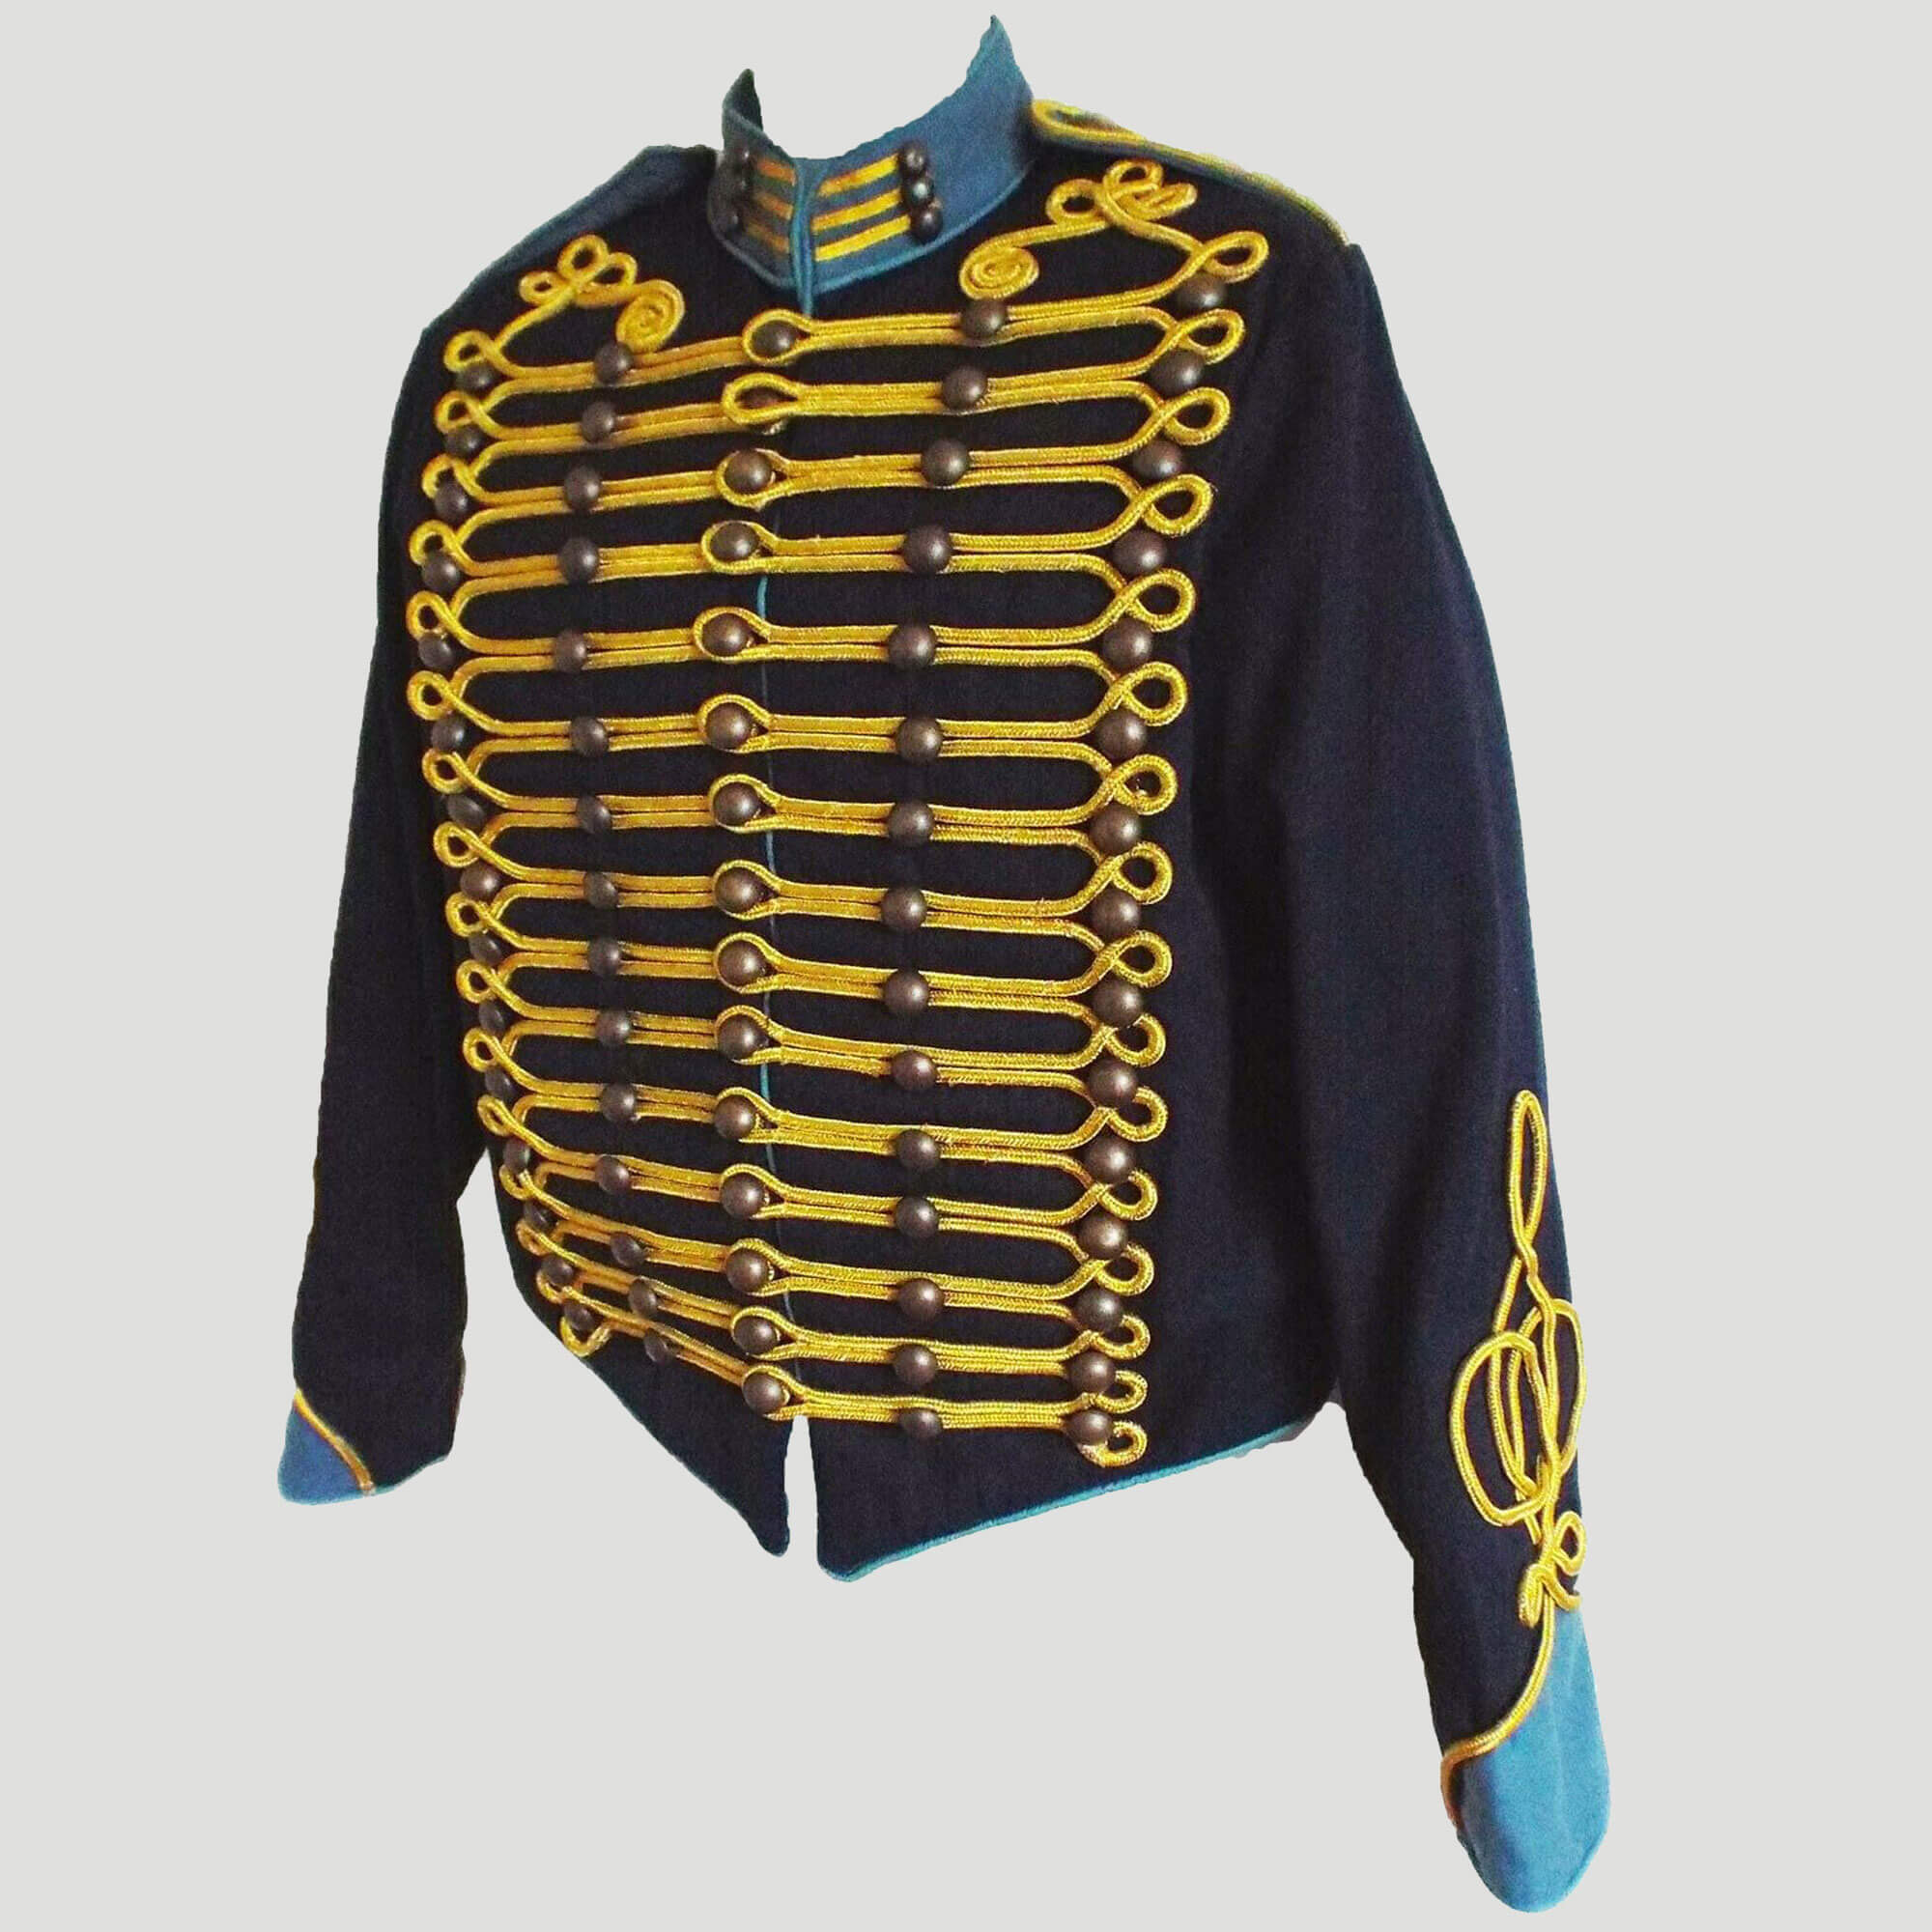 New Steampunk Military Hussar Jacket in Men Navy Blue Trim And Gold Braid